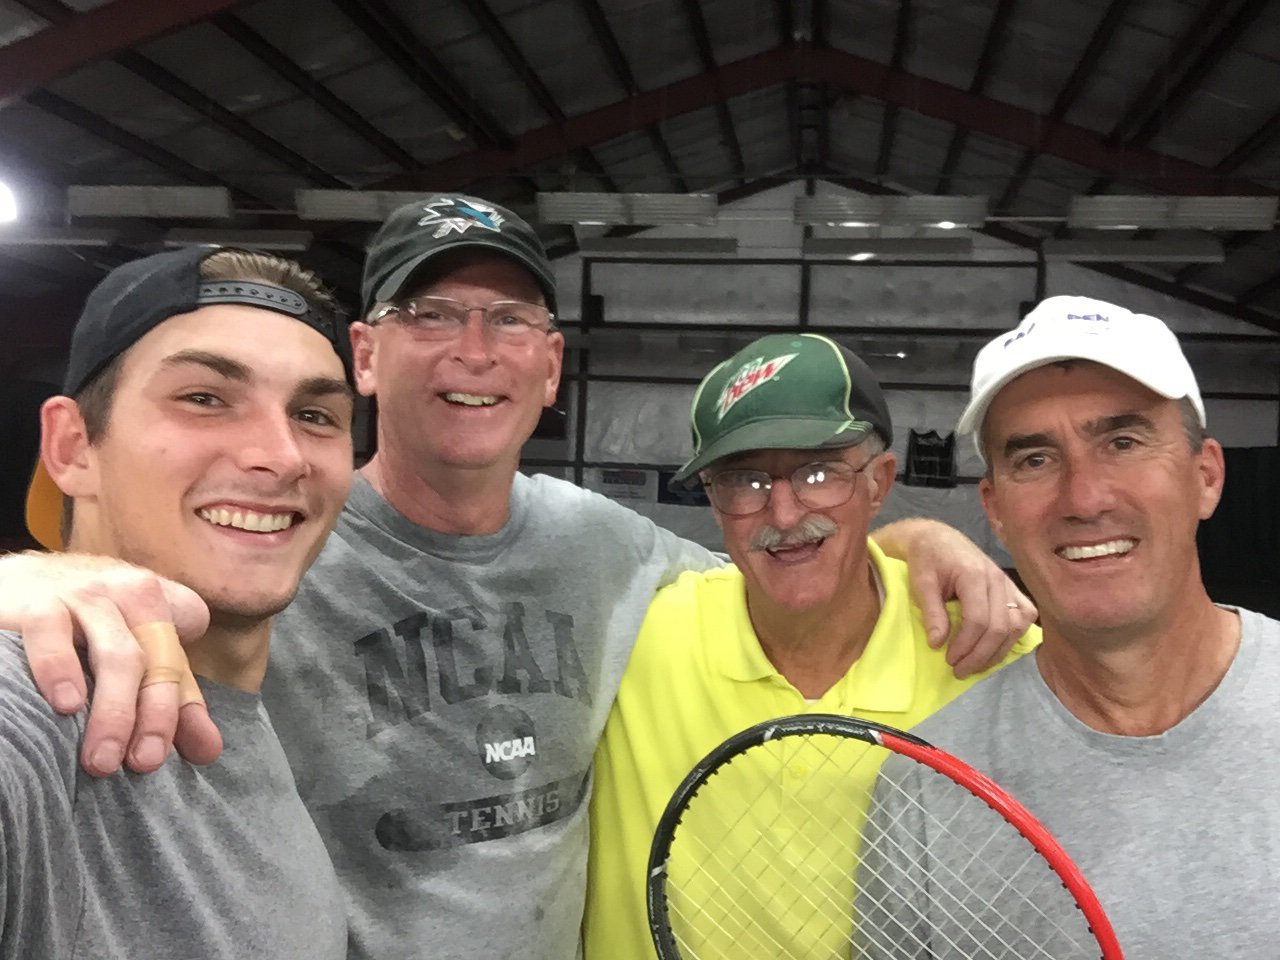 Family, faith, friends, pickleball, tennis, humor & hockey. Honesty & humility are always the right choice. Follow up is rare, and it shows respect for others.